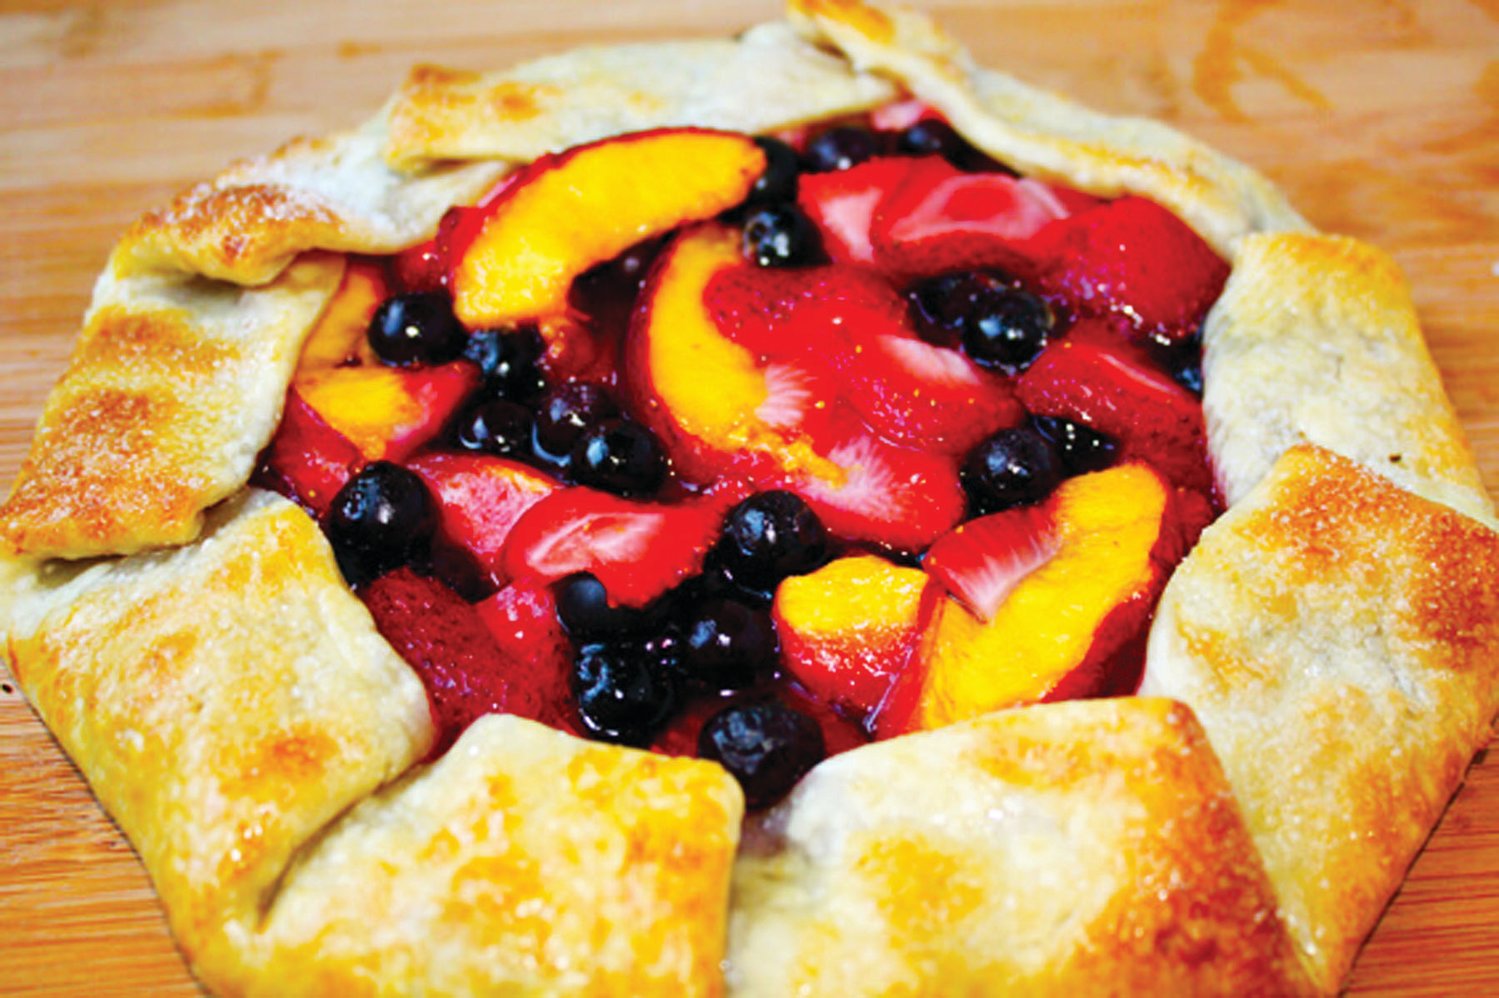 The fruits of summer are perfect for homemade pie, or in this case a rustic galette that takes only minutes to put together.